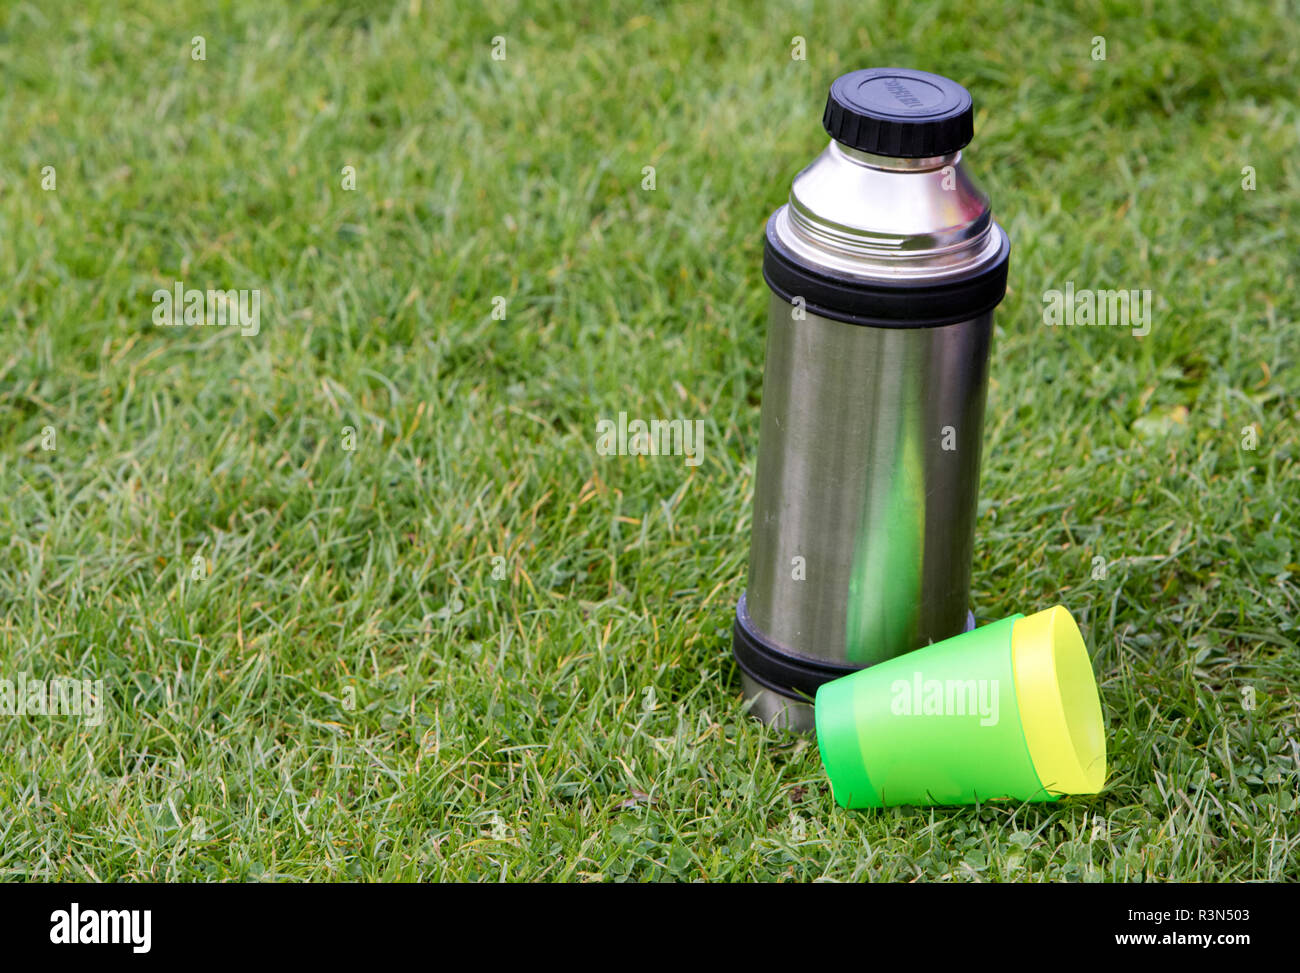 https://c8.alamy.com/comp/R3N503/metal-thermos-flask-on-grass-with-two-plastic-cups-outside-during-summer-keeping-drinks-cool-R3N503.jpg